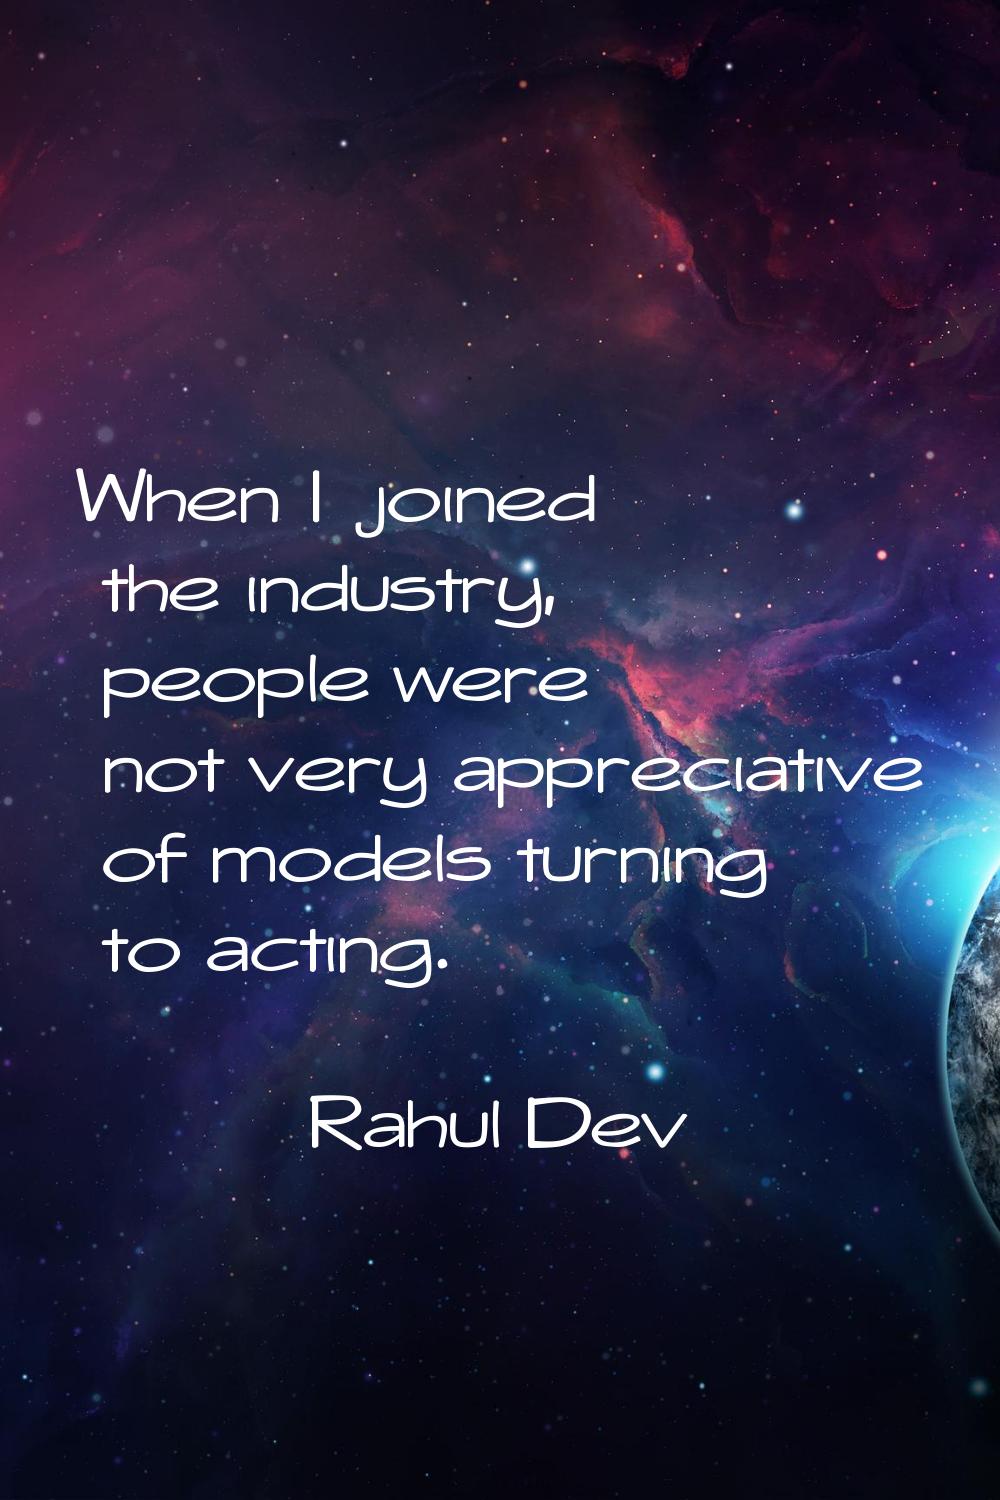 When I joined the industry, people were not very appreciative of models turning to acting.